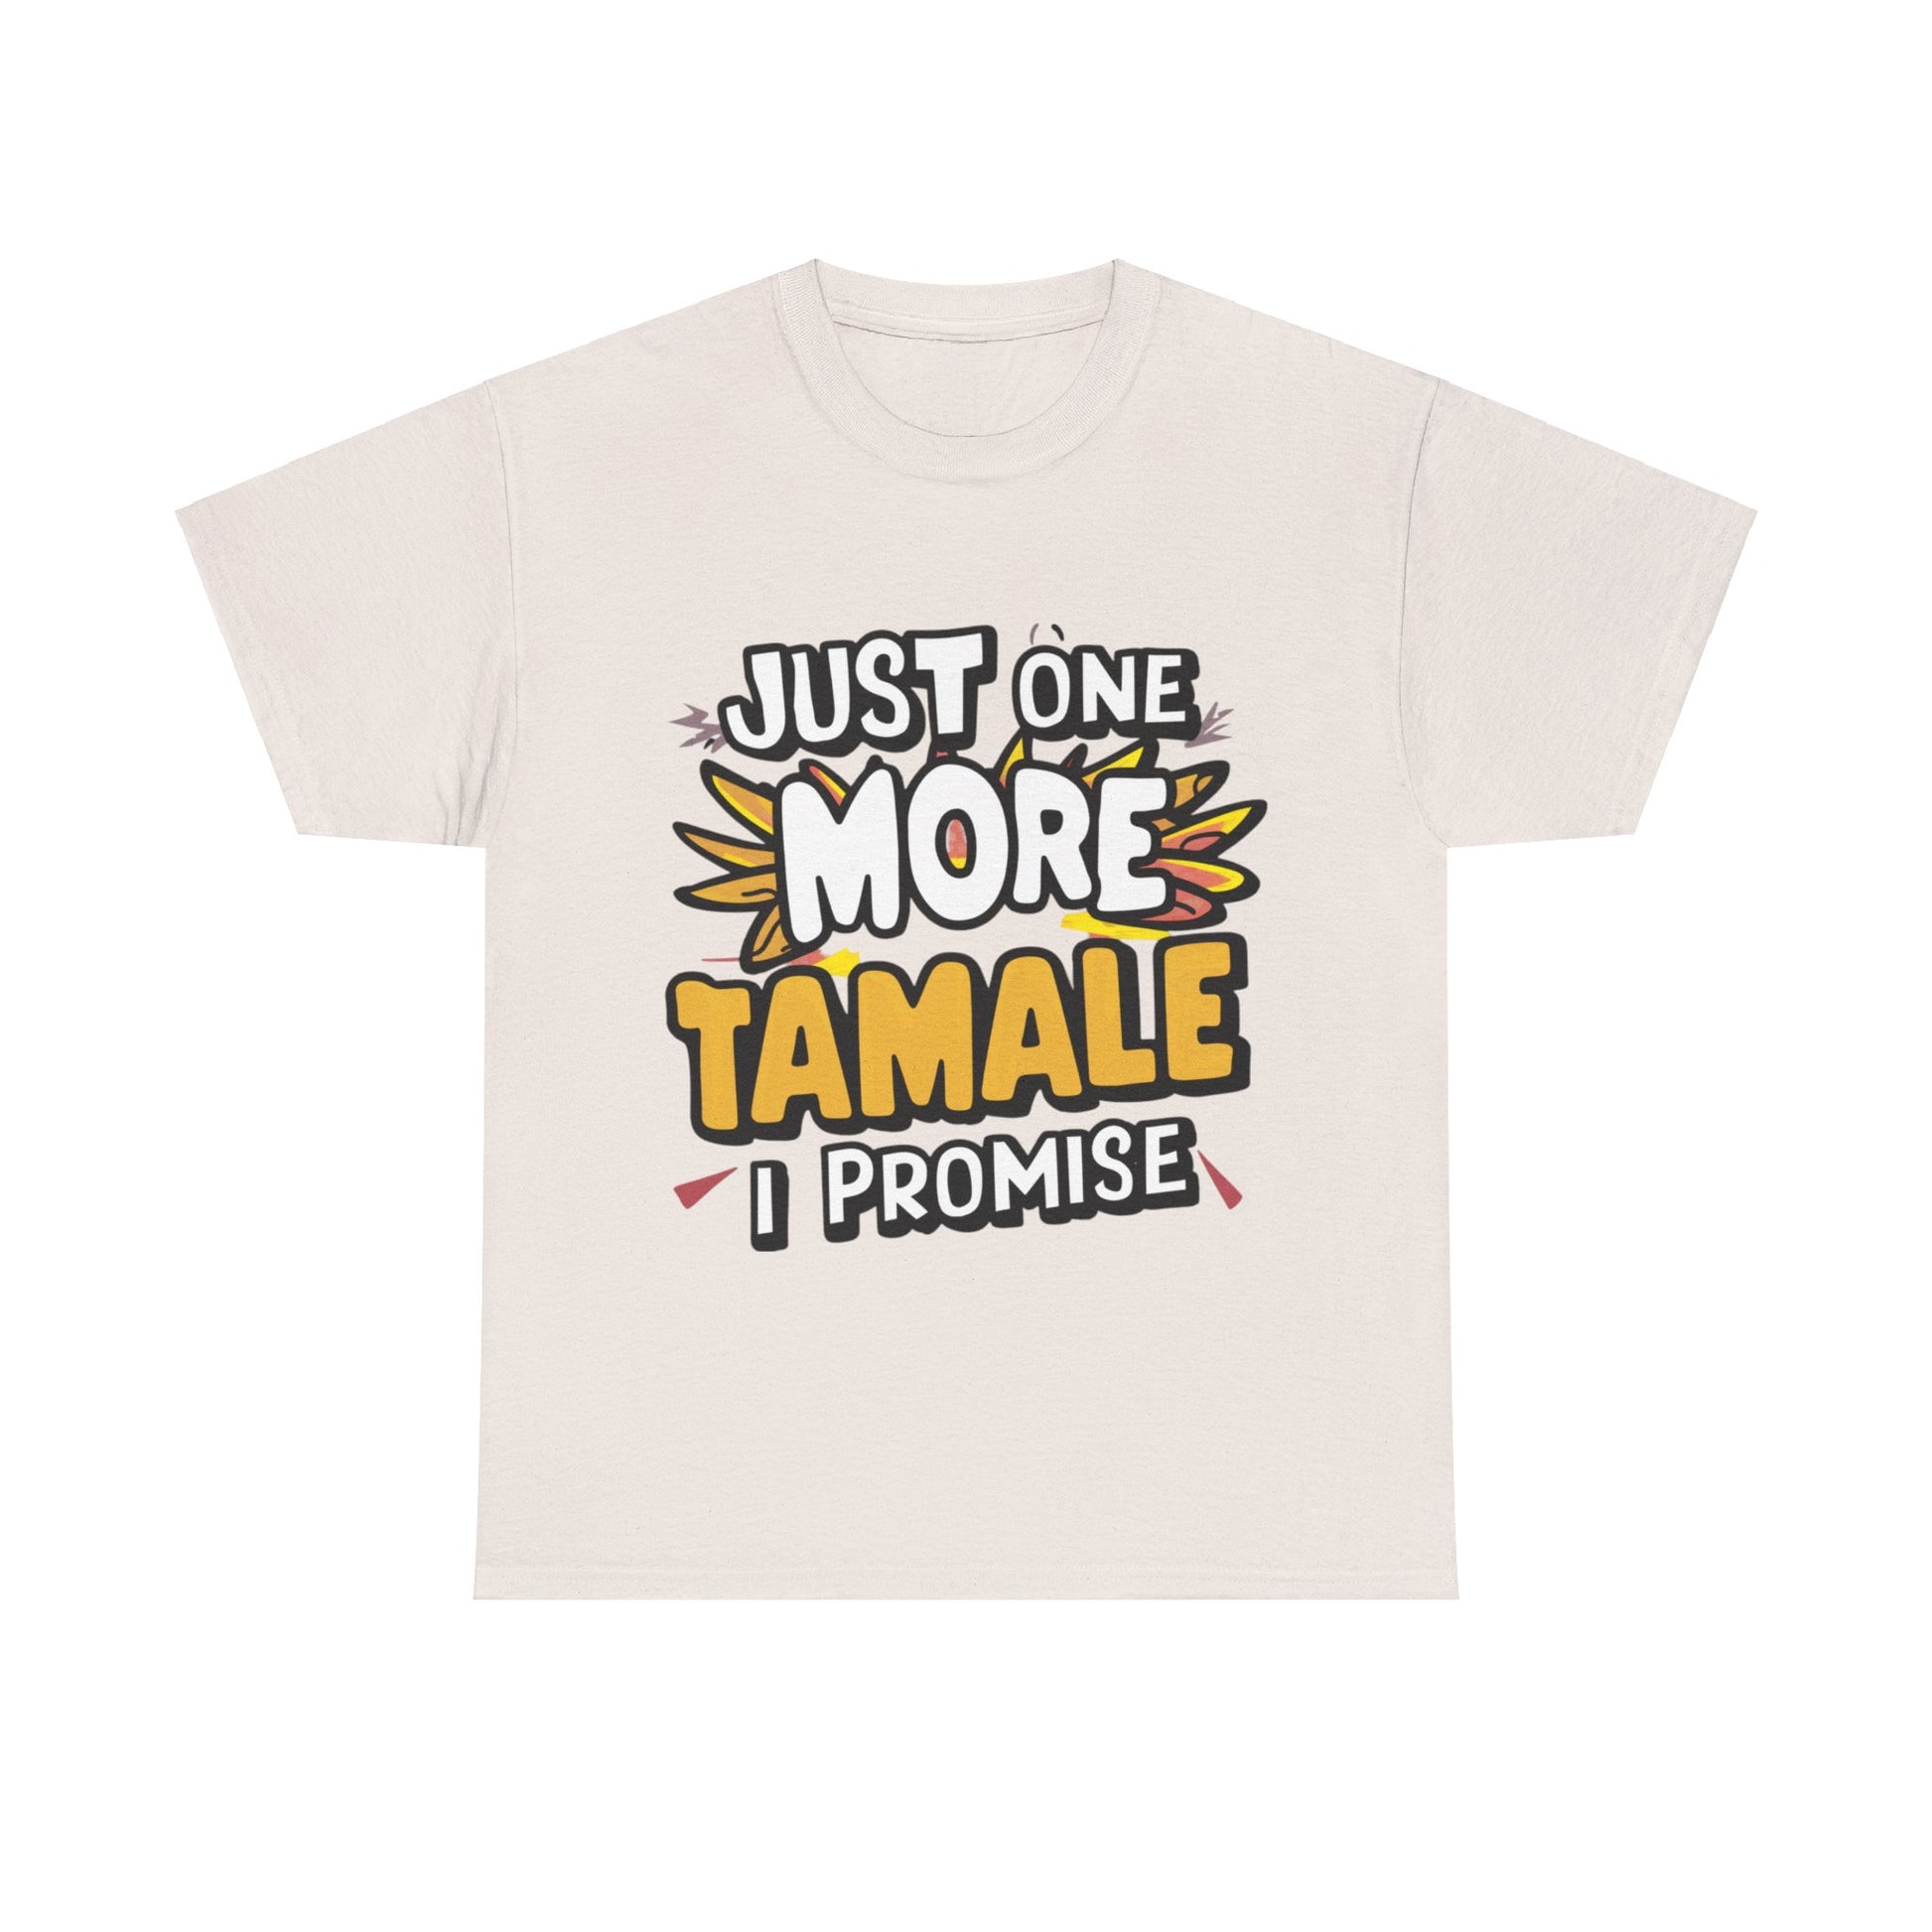 Just One More Tamale I Promise Mexican Food Graphic Unisex Heavy Cotton Tee Cotton Funny Humorous Graphic Soft Premium Unisex Men Women Ice Gray T-shirt Birthday Gift-12